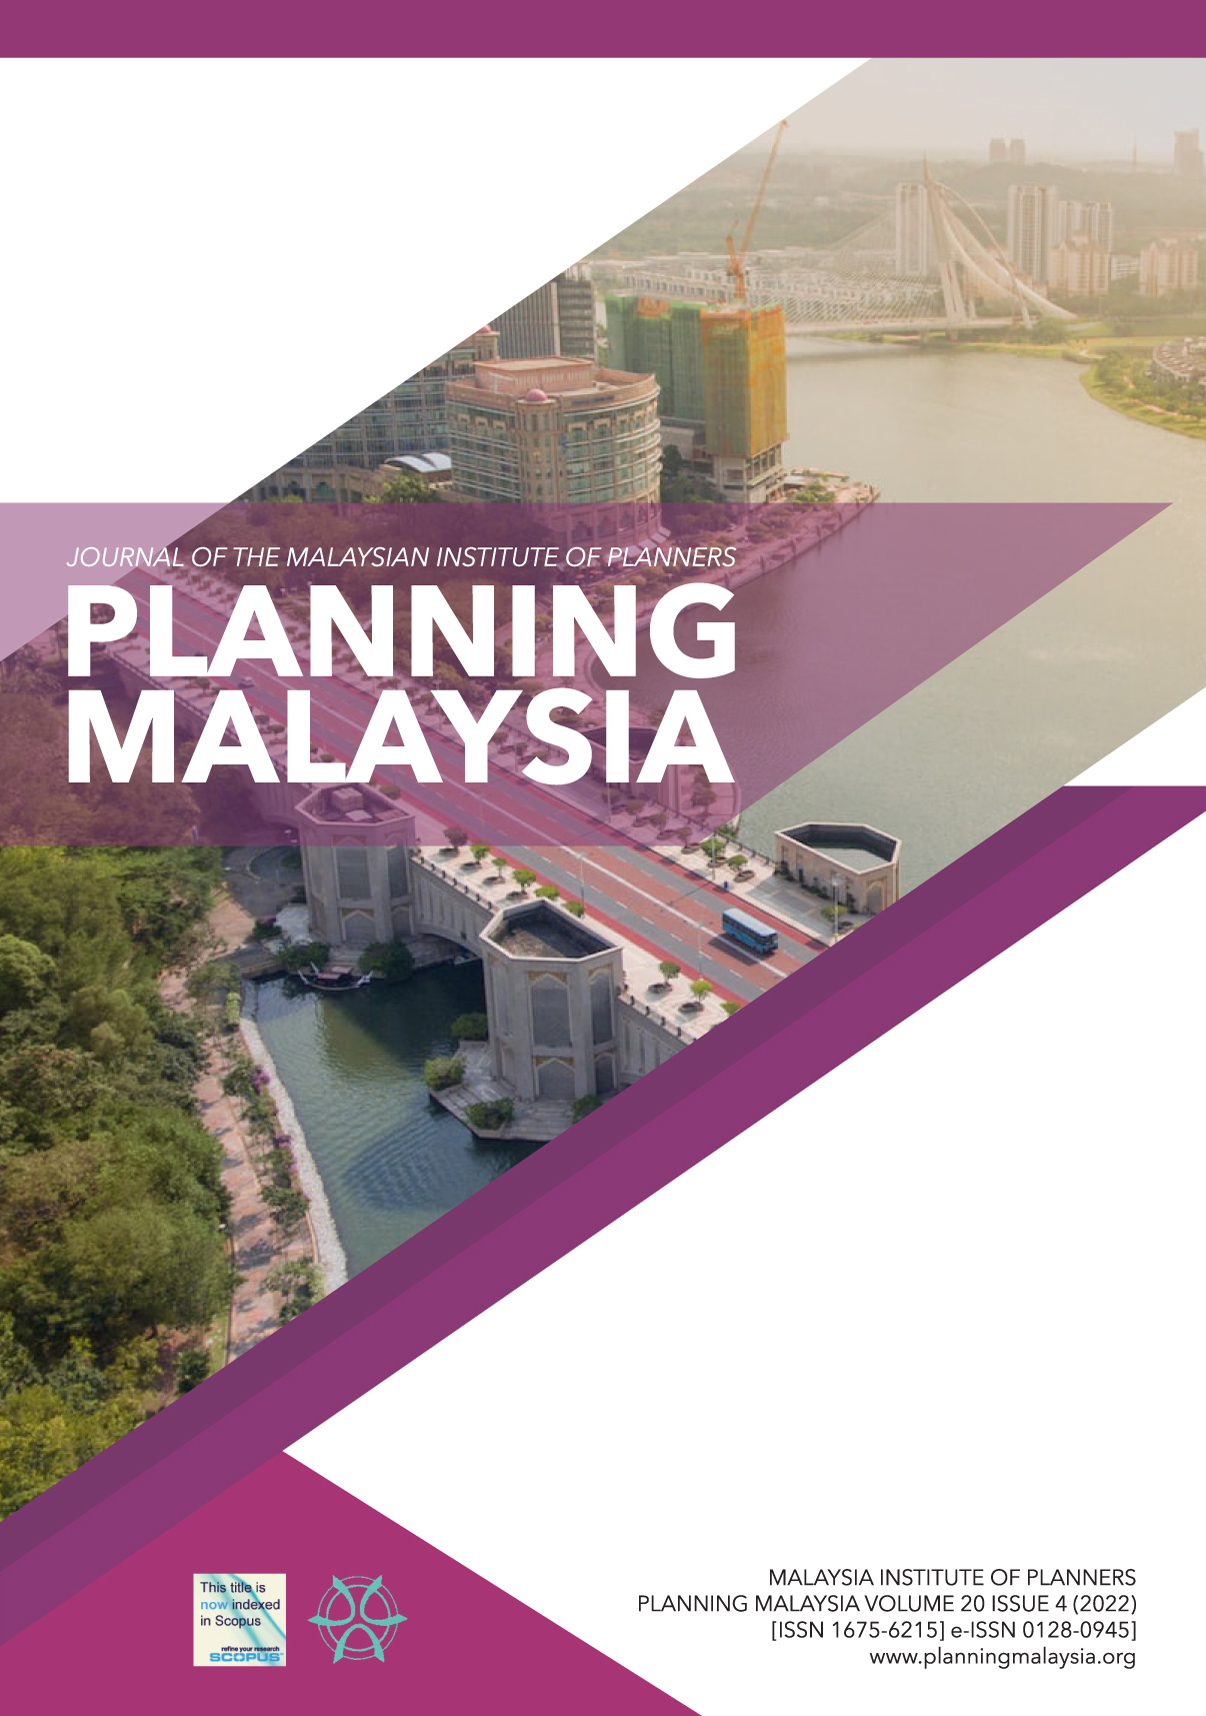 					View Vol. 20 (2022): PLANNING MALAYSIA JOURNAL : Volume 20, Issue 4, 2022
				